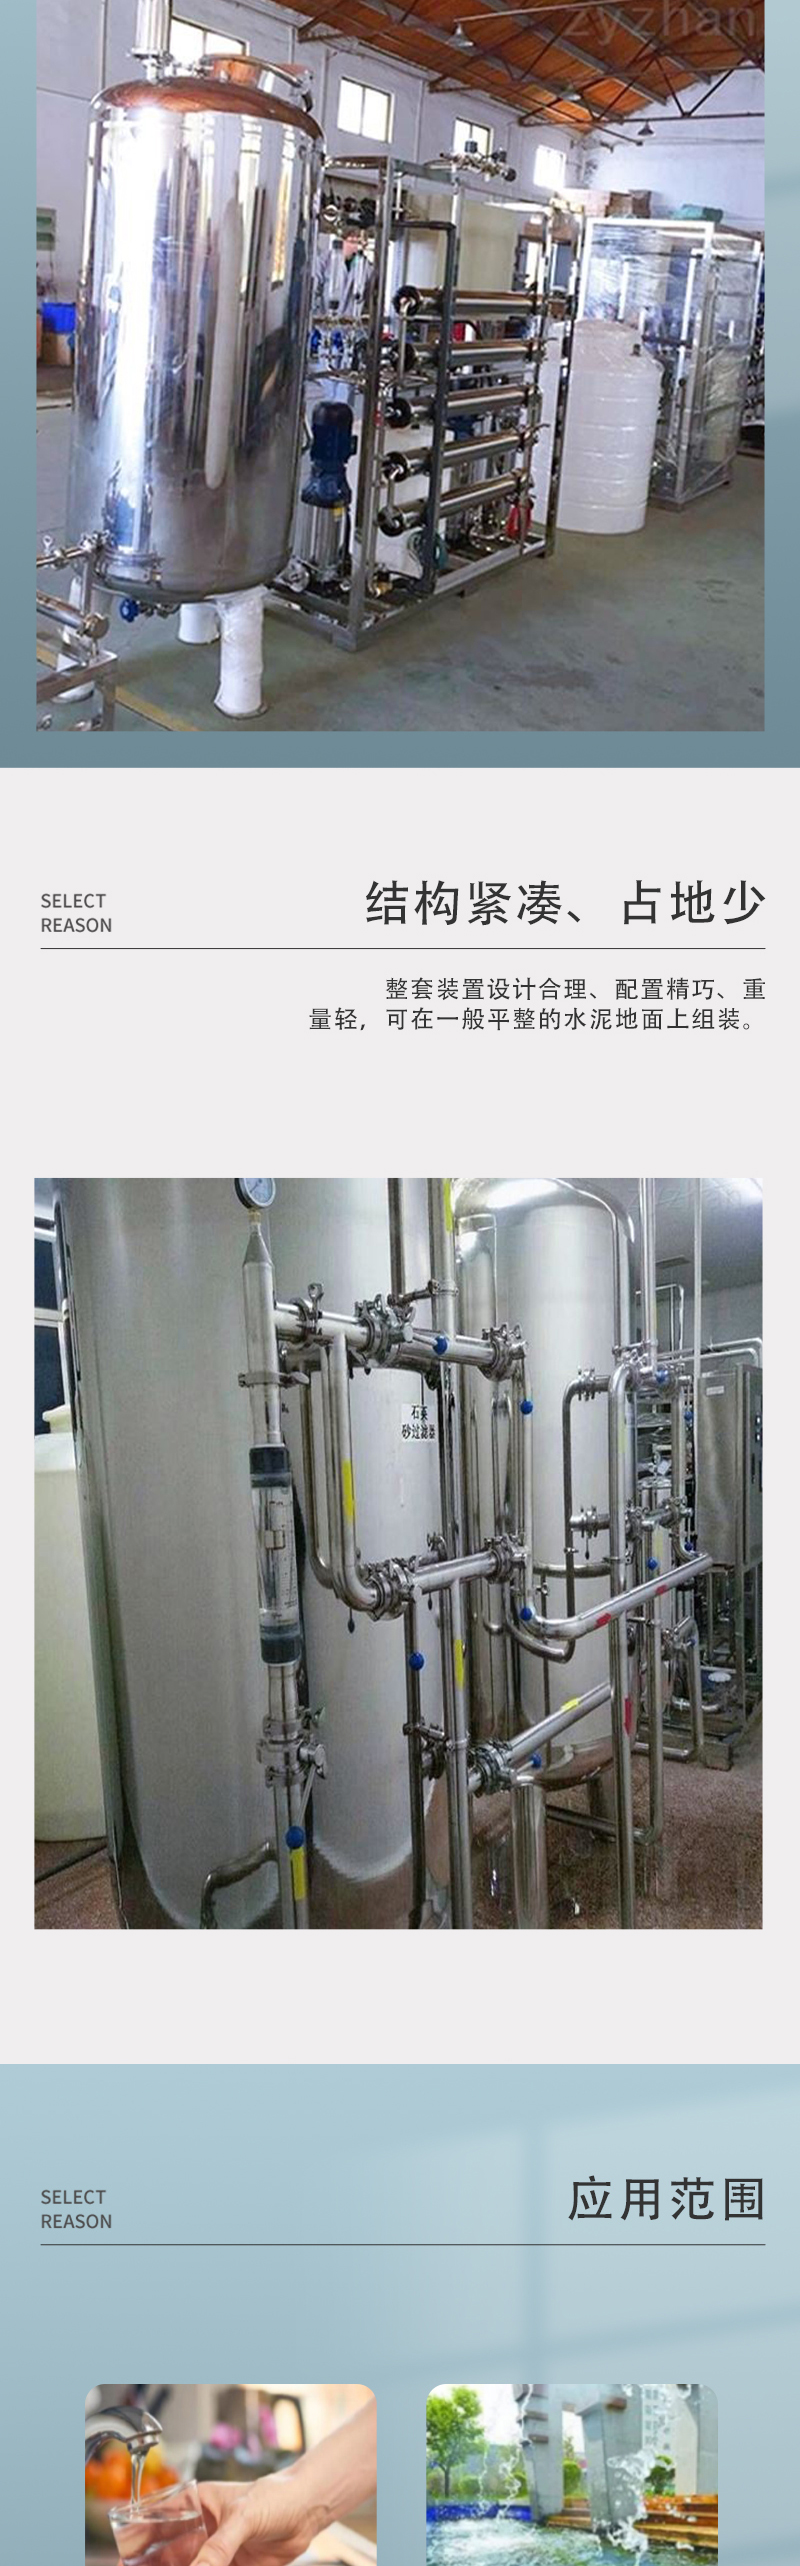 KX fully automatic industrial boiler water treatment equipment Kaixu purification production capacity 2T/H inlet diameter DN32